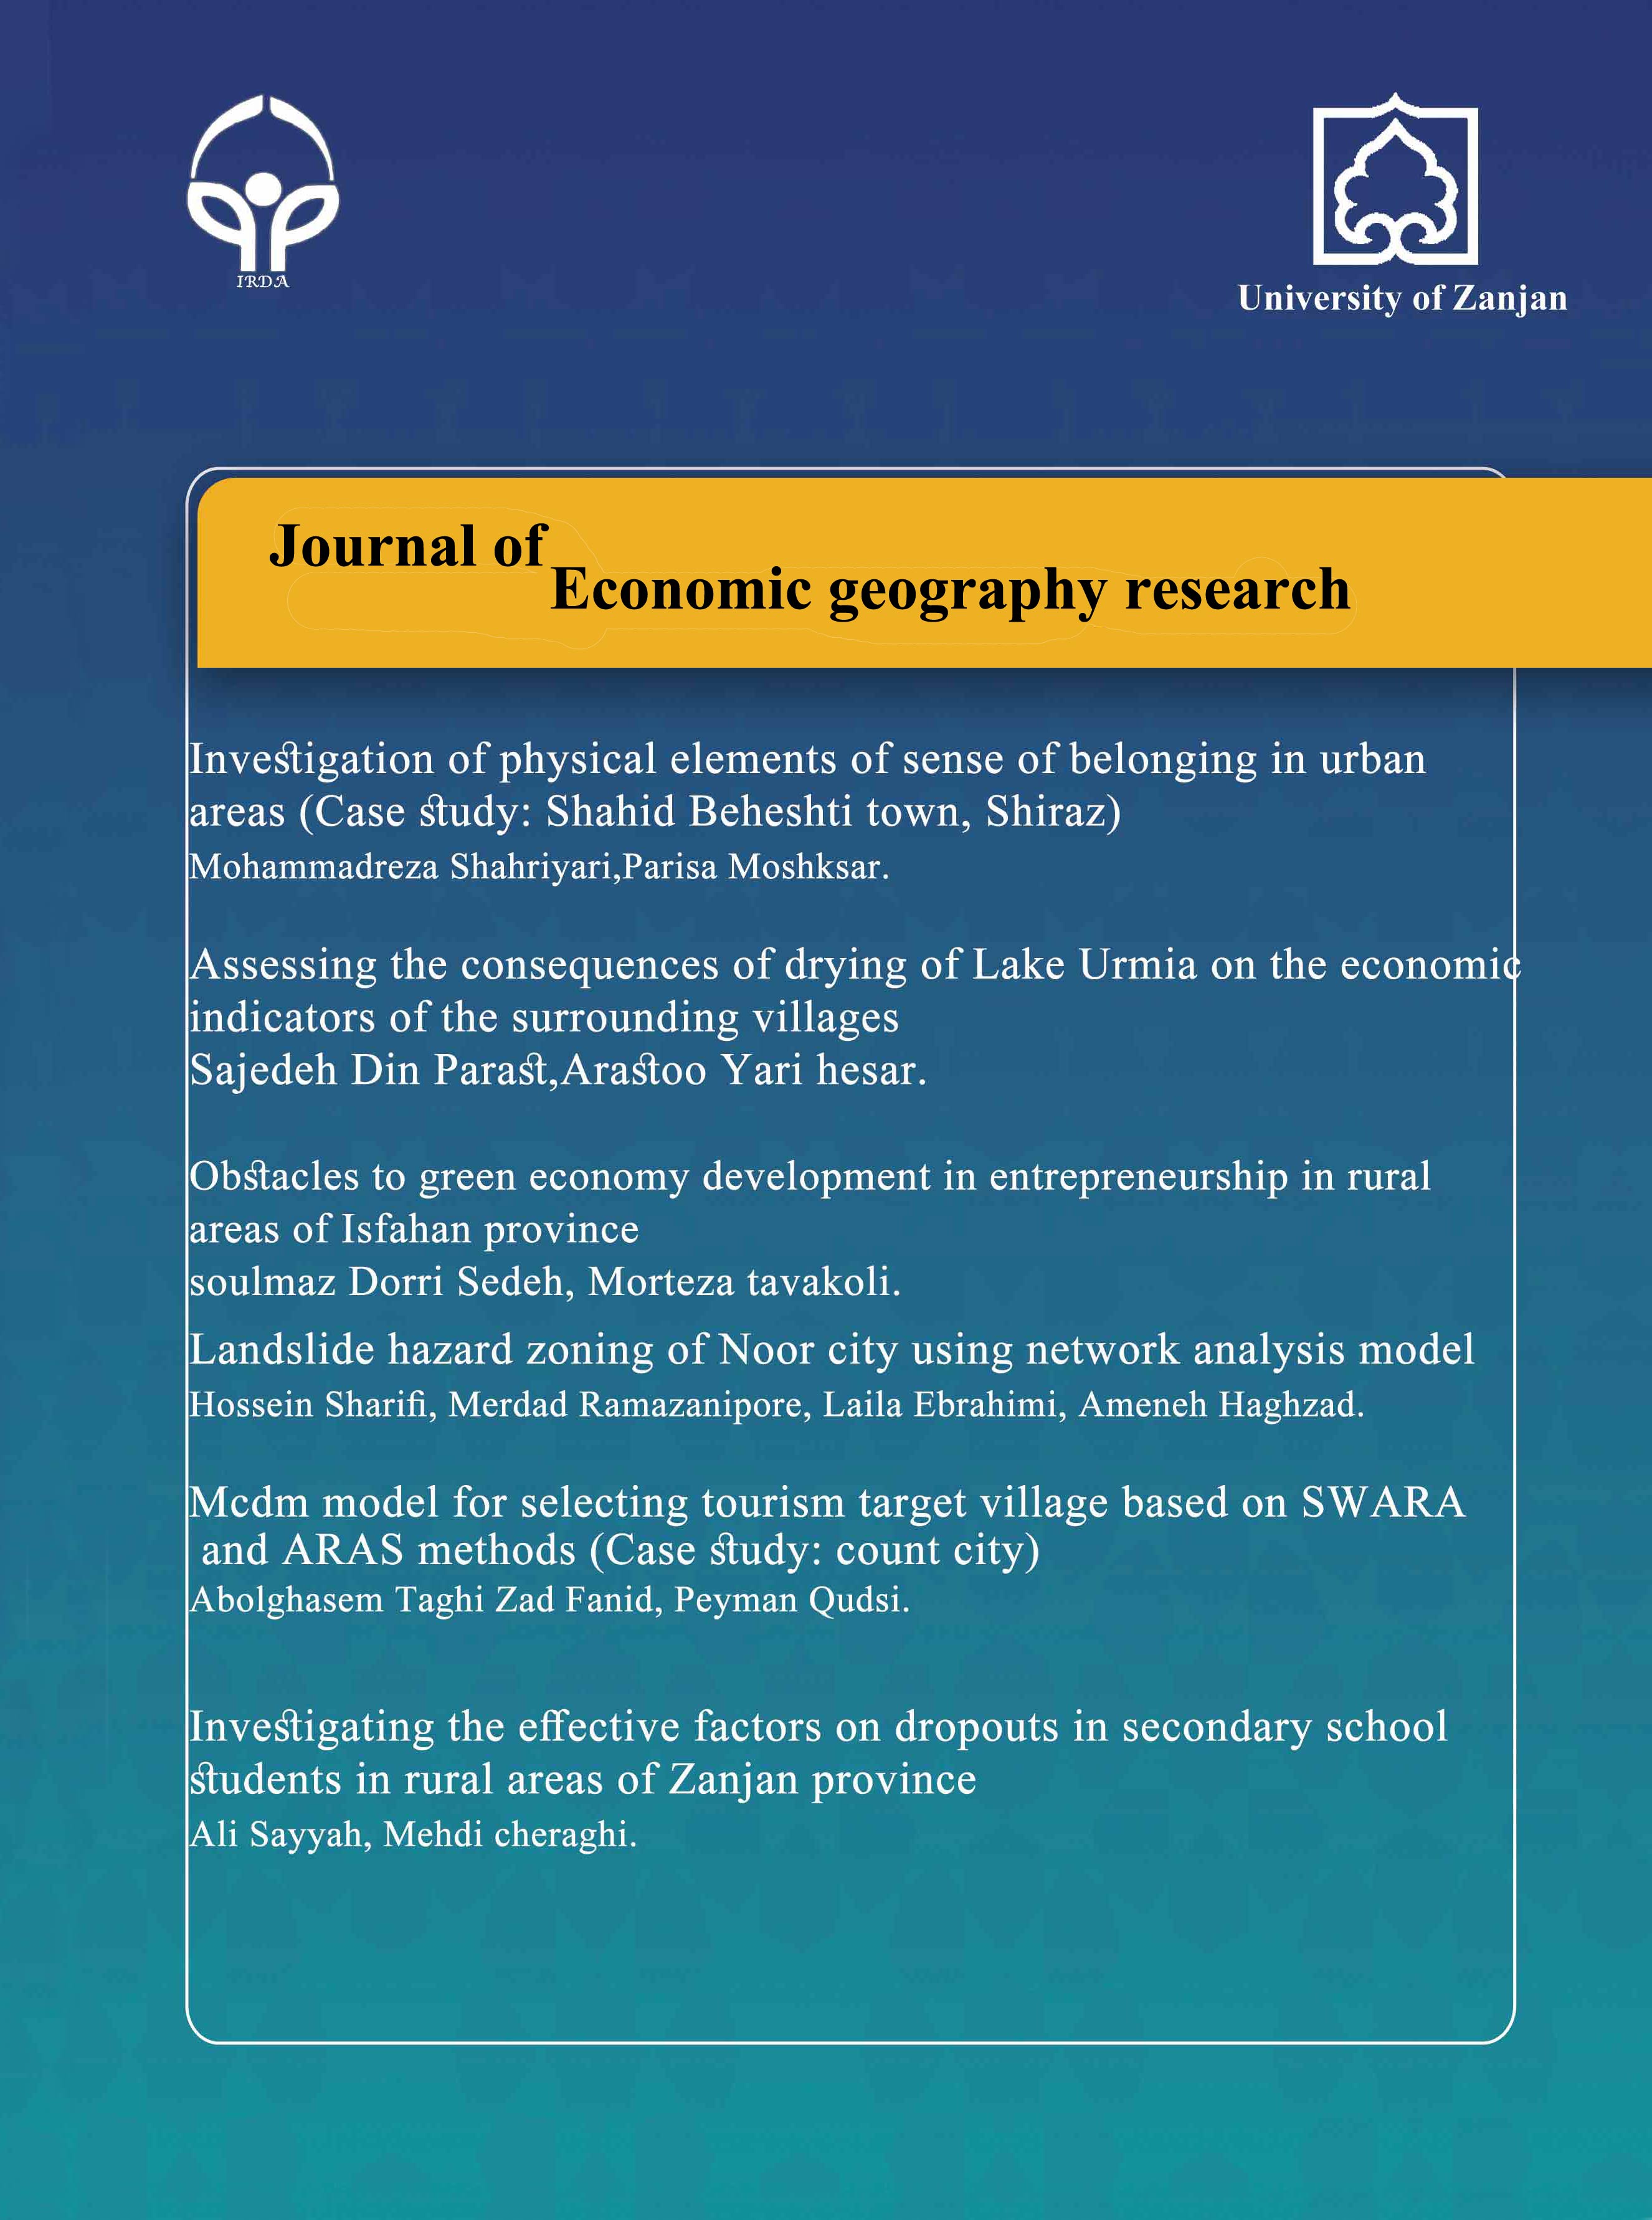 Journal of Economic Geography Research